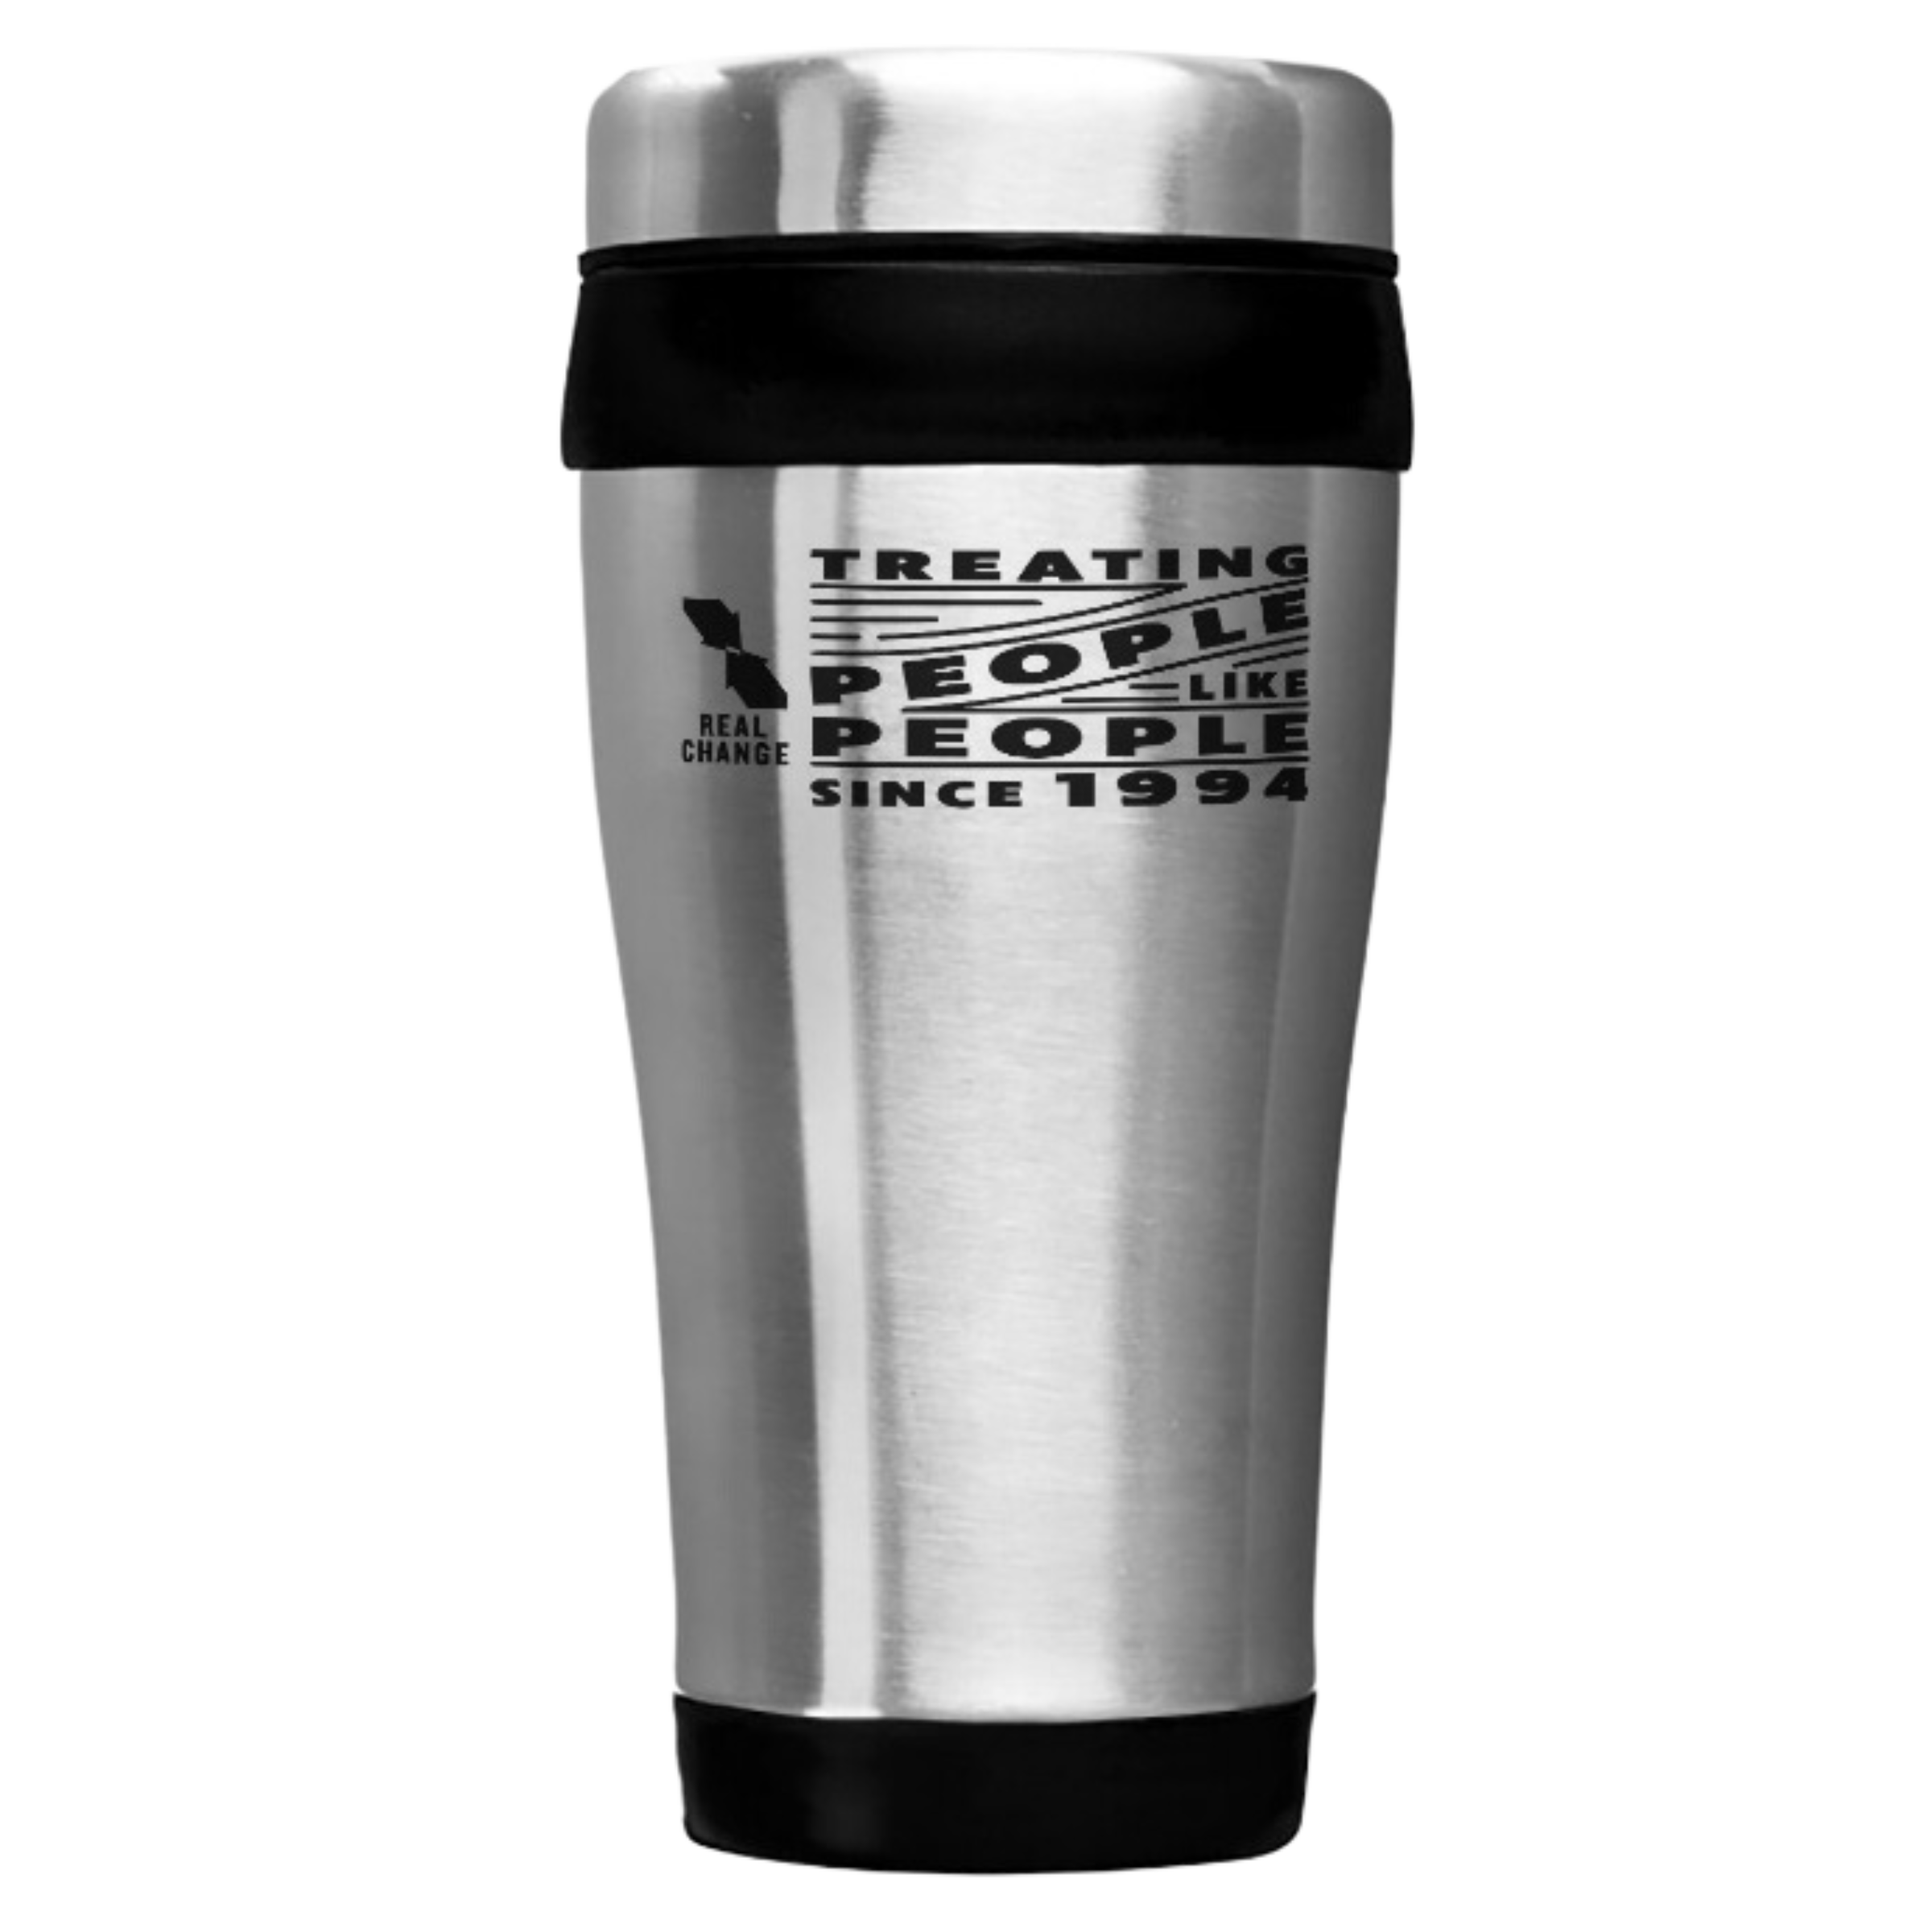 Stainless steel tumbler with artwork that says "Treating People like People since 1994"